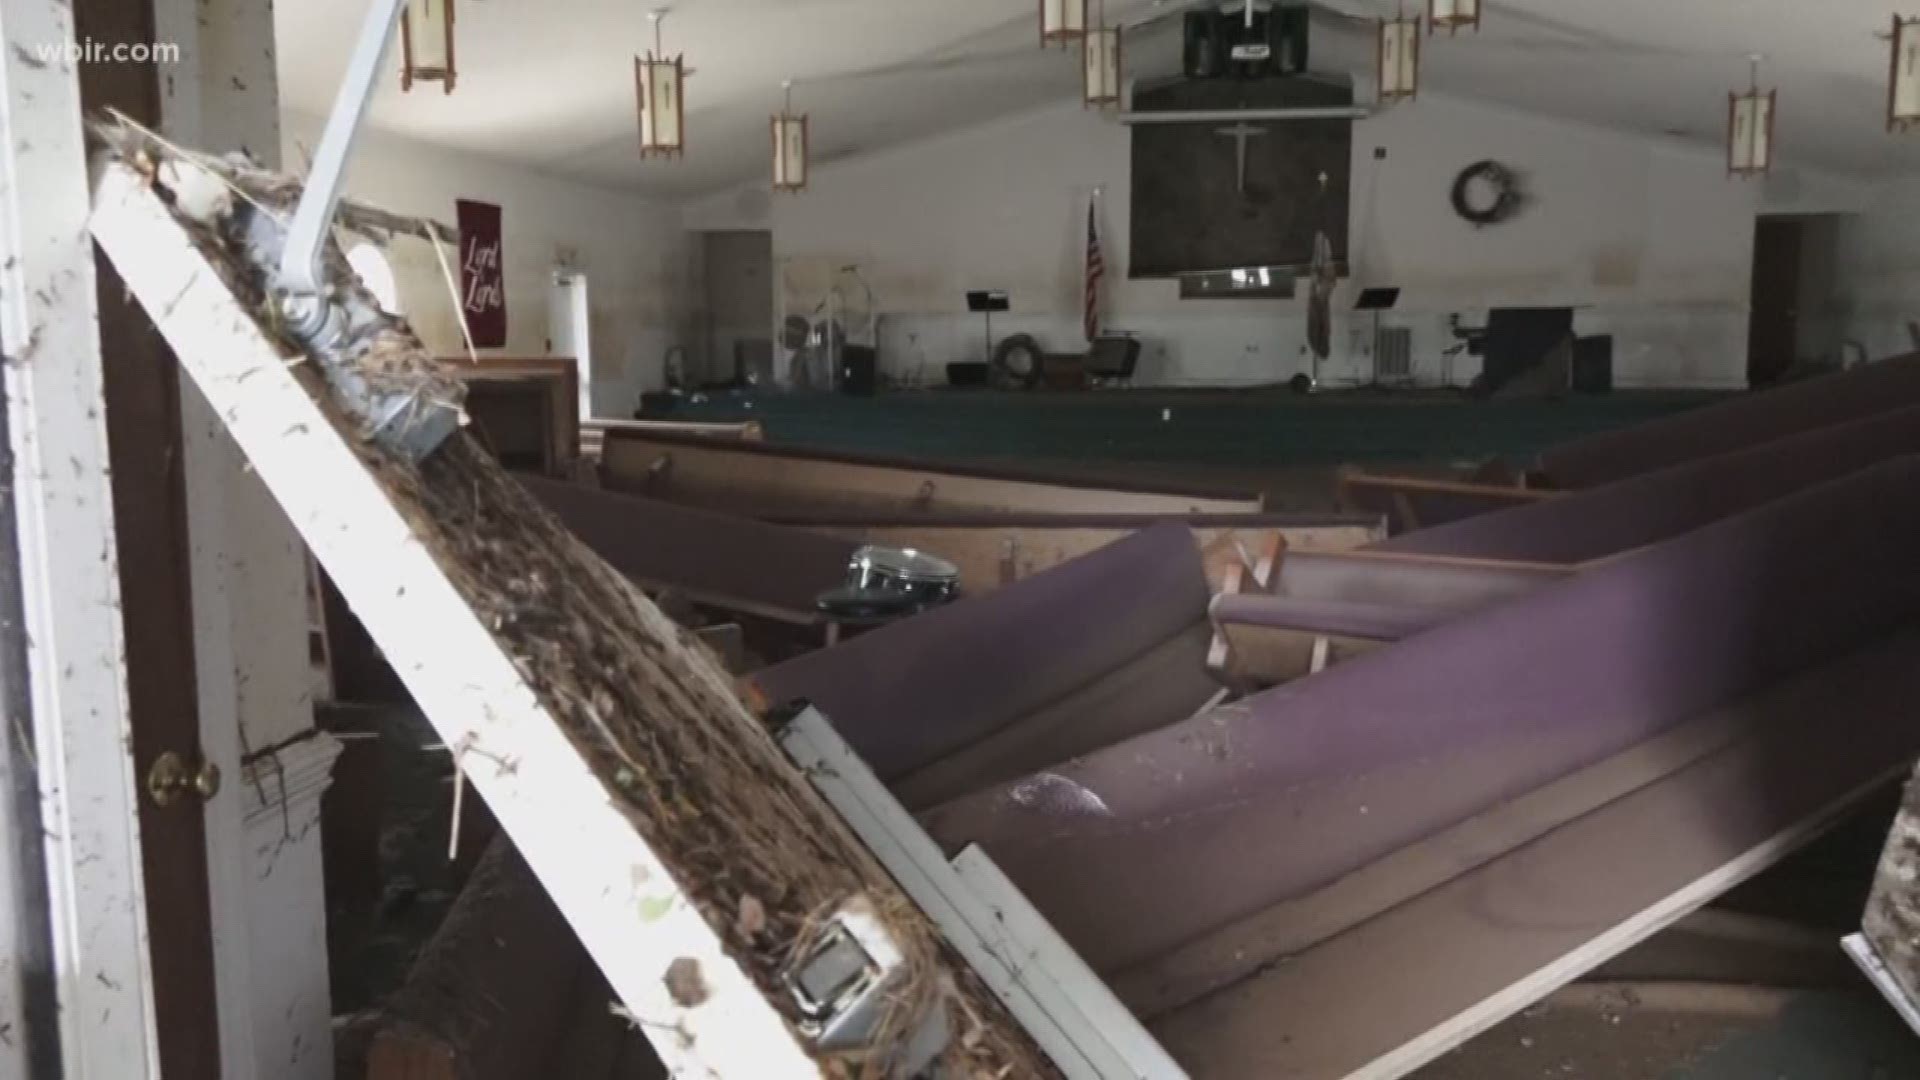 Floodwaters, some five to six feet high that left a path of damage in parts of Campbell County over the weekend, have dropped. The clean-up is underway, but some buildings are a total loss.